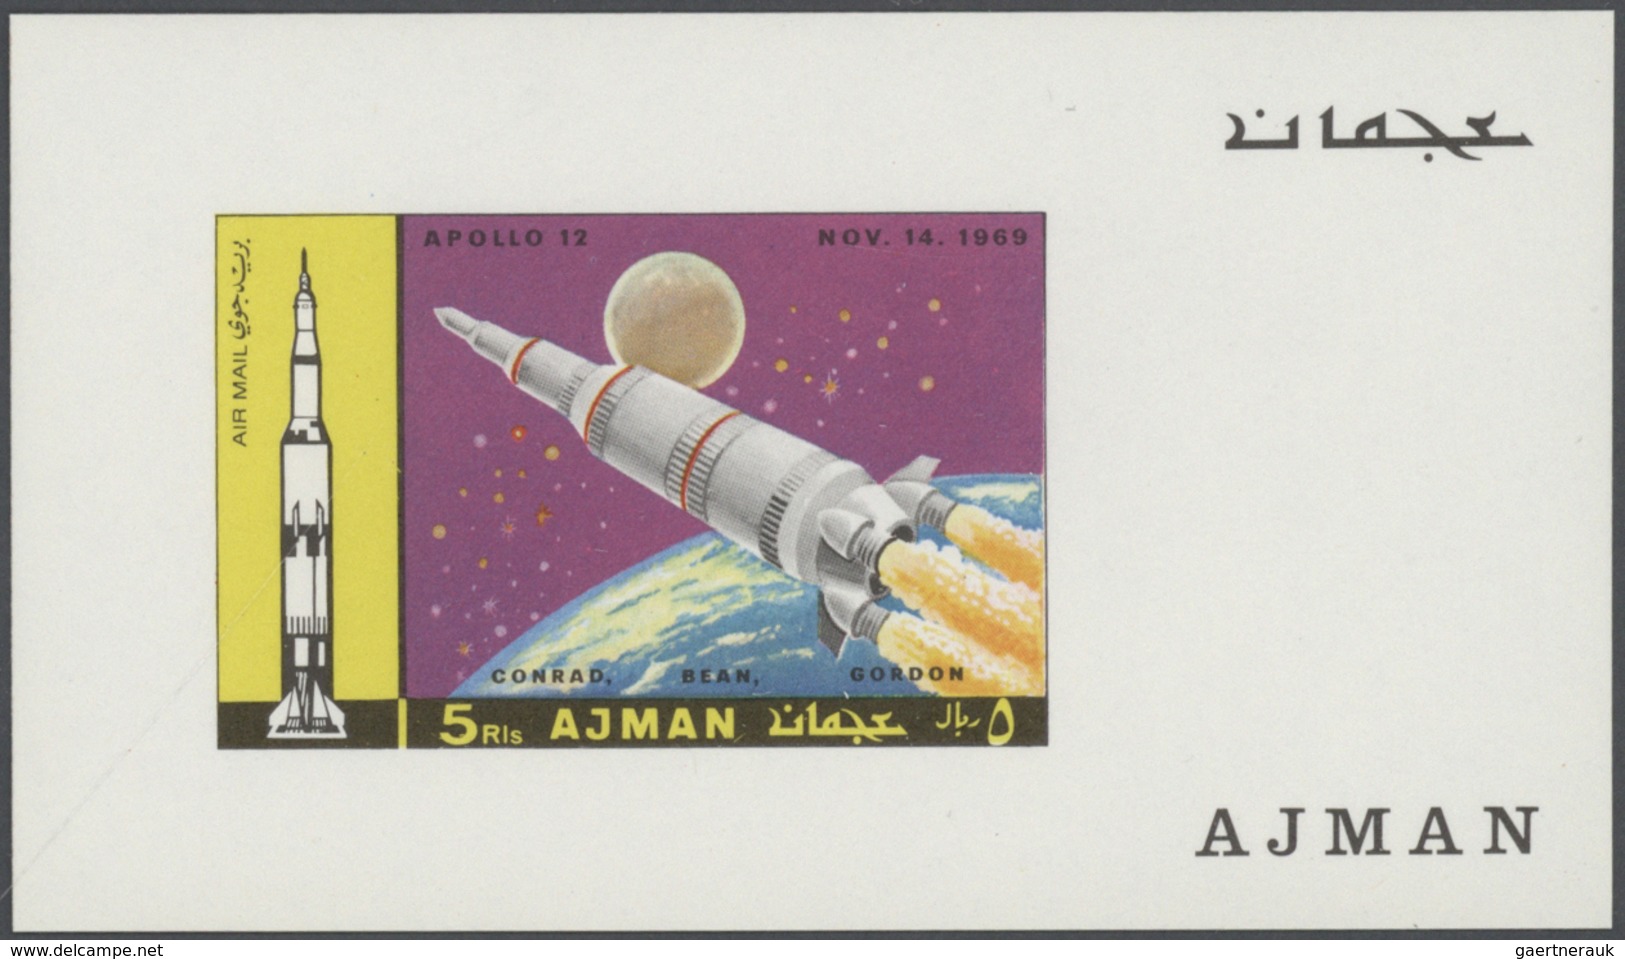 Adschman / Ajman: 1971/1972, U/m Collection Of Apprx. 386 De Luxe Sheets With Apparently Only Comple - Ajman